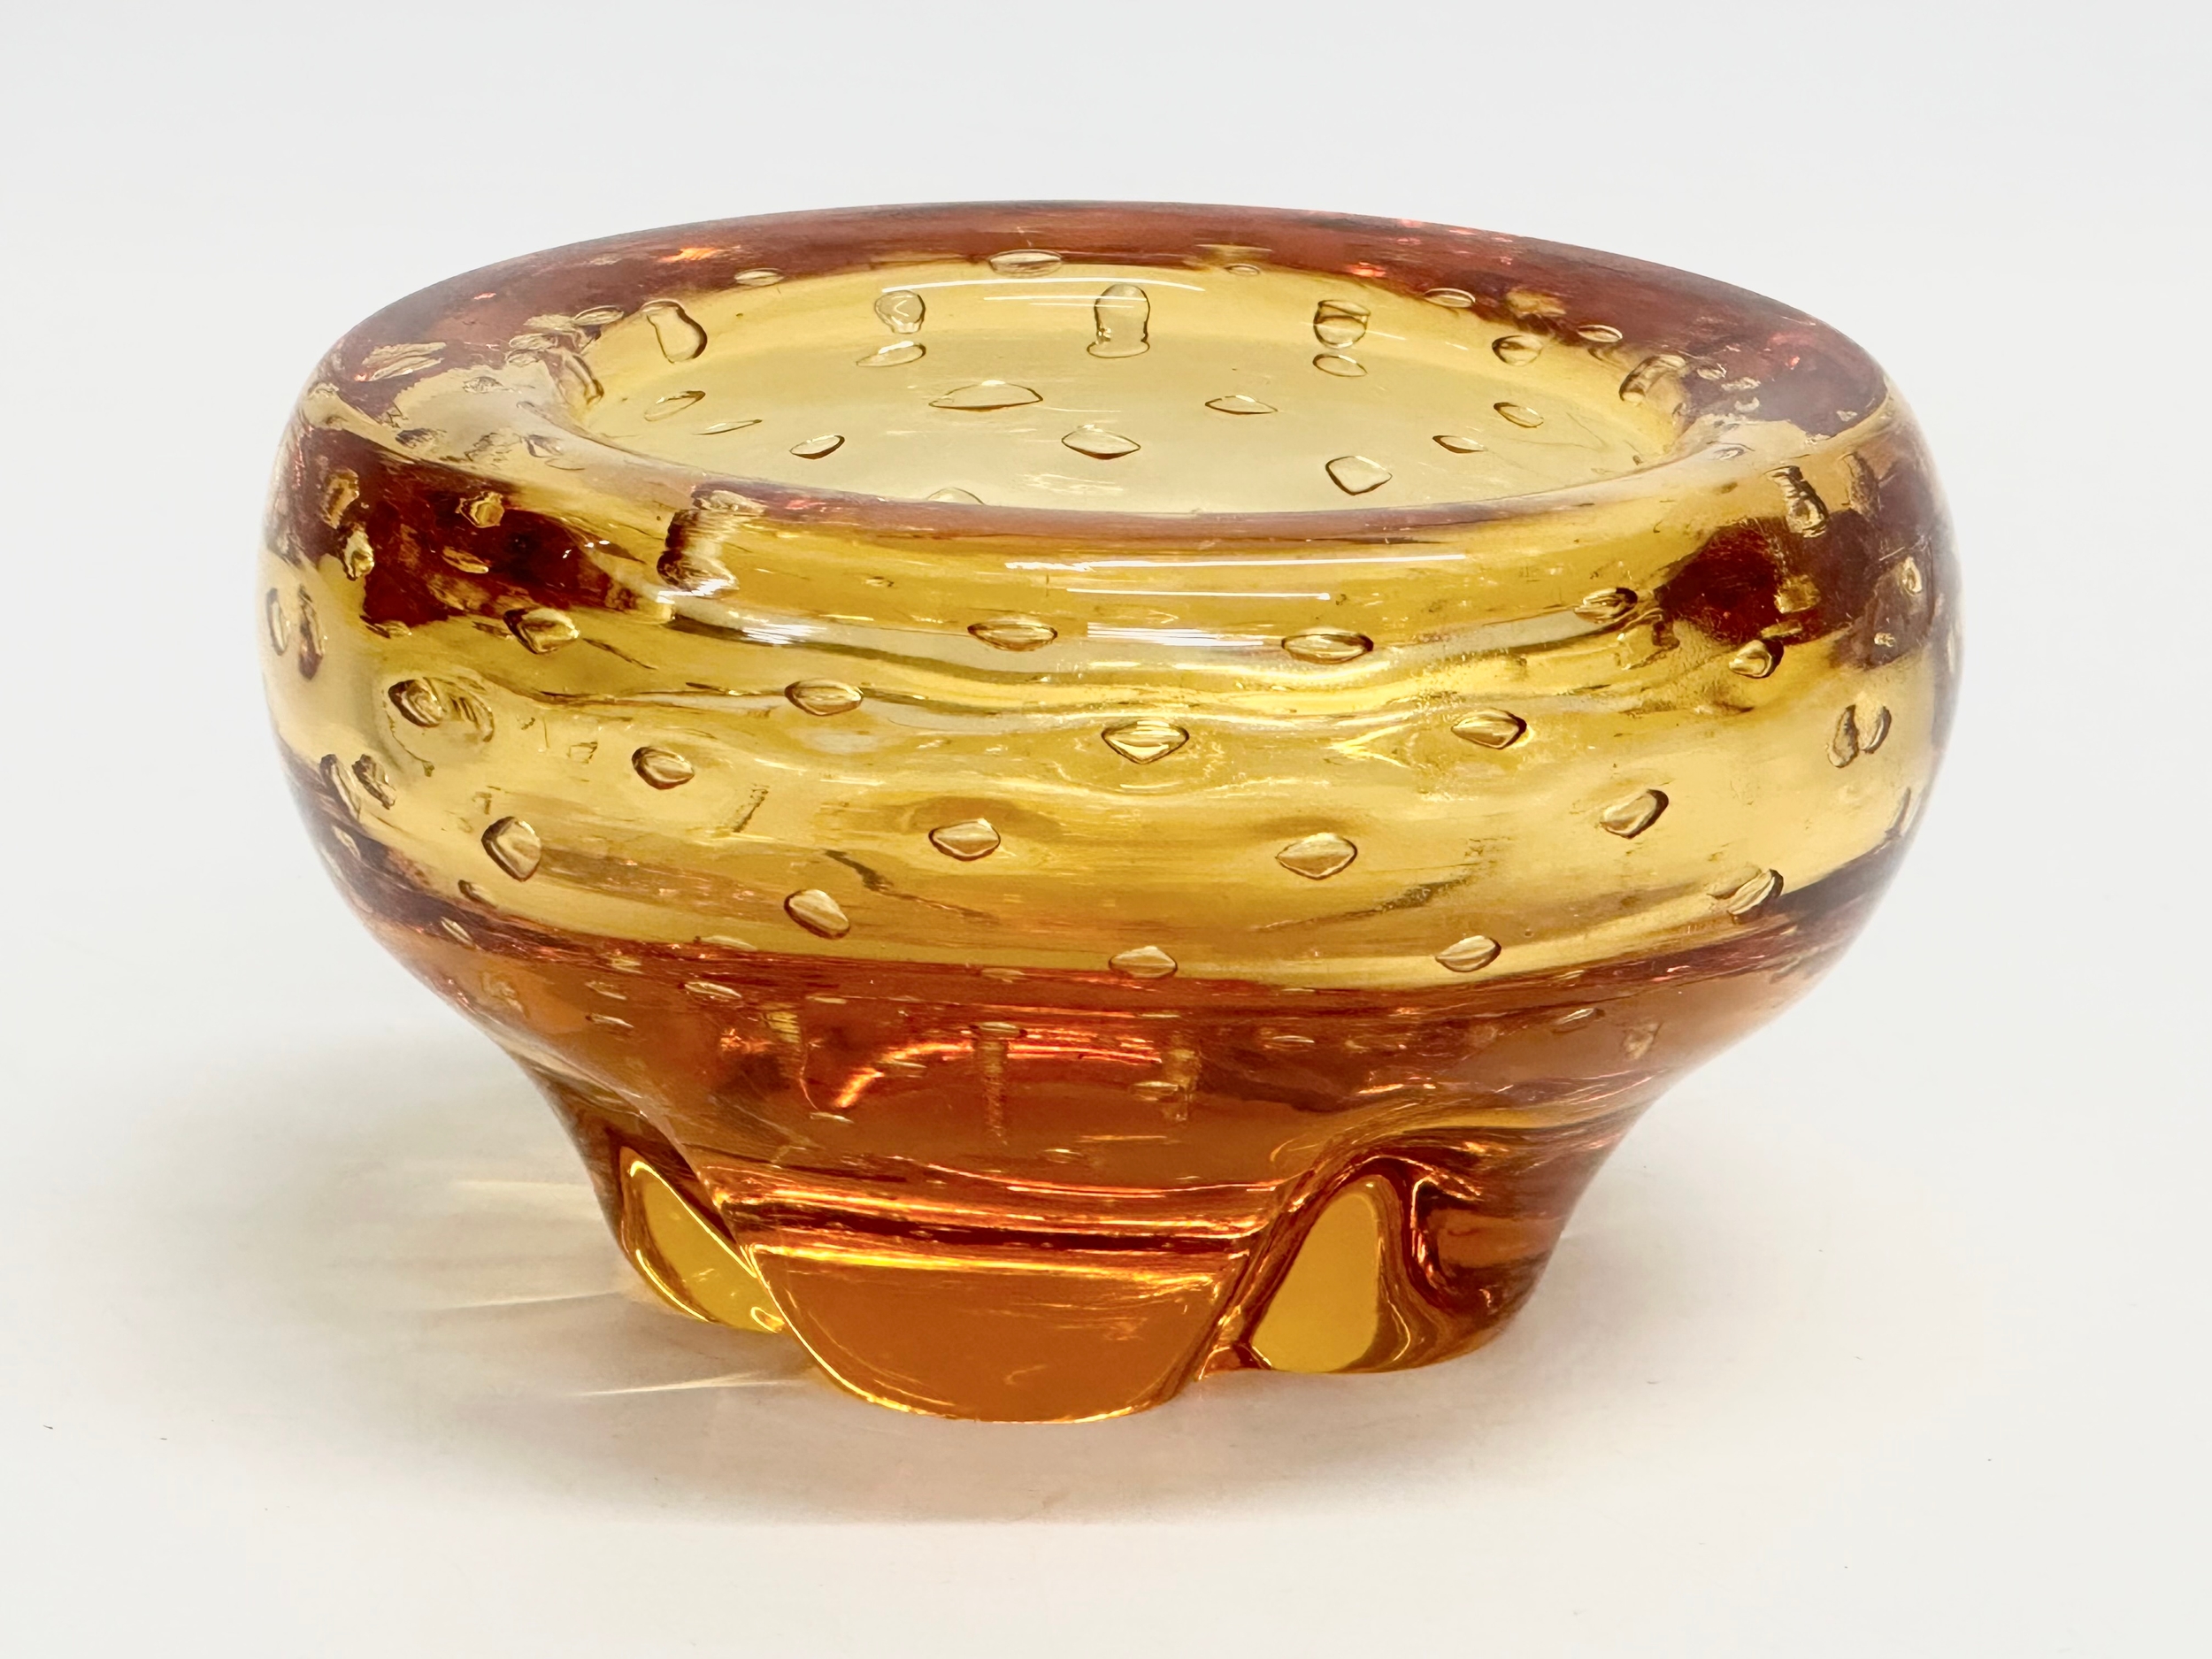 A ‘Molar’ Bubbled Bowl designed by Geoffrey Baxter for Whitefriars. 12x7cm